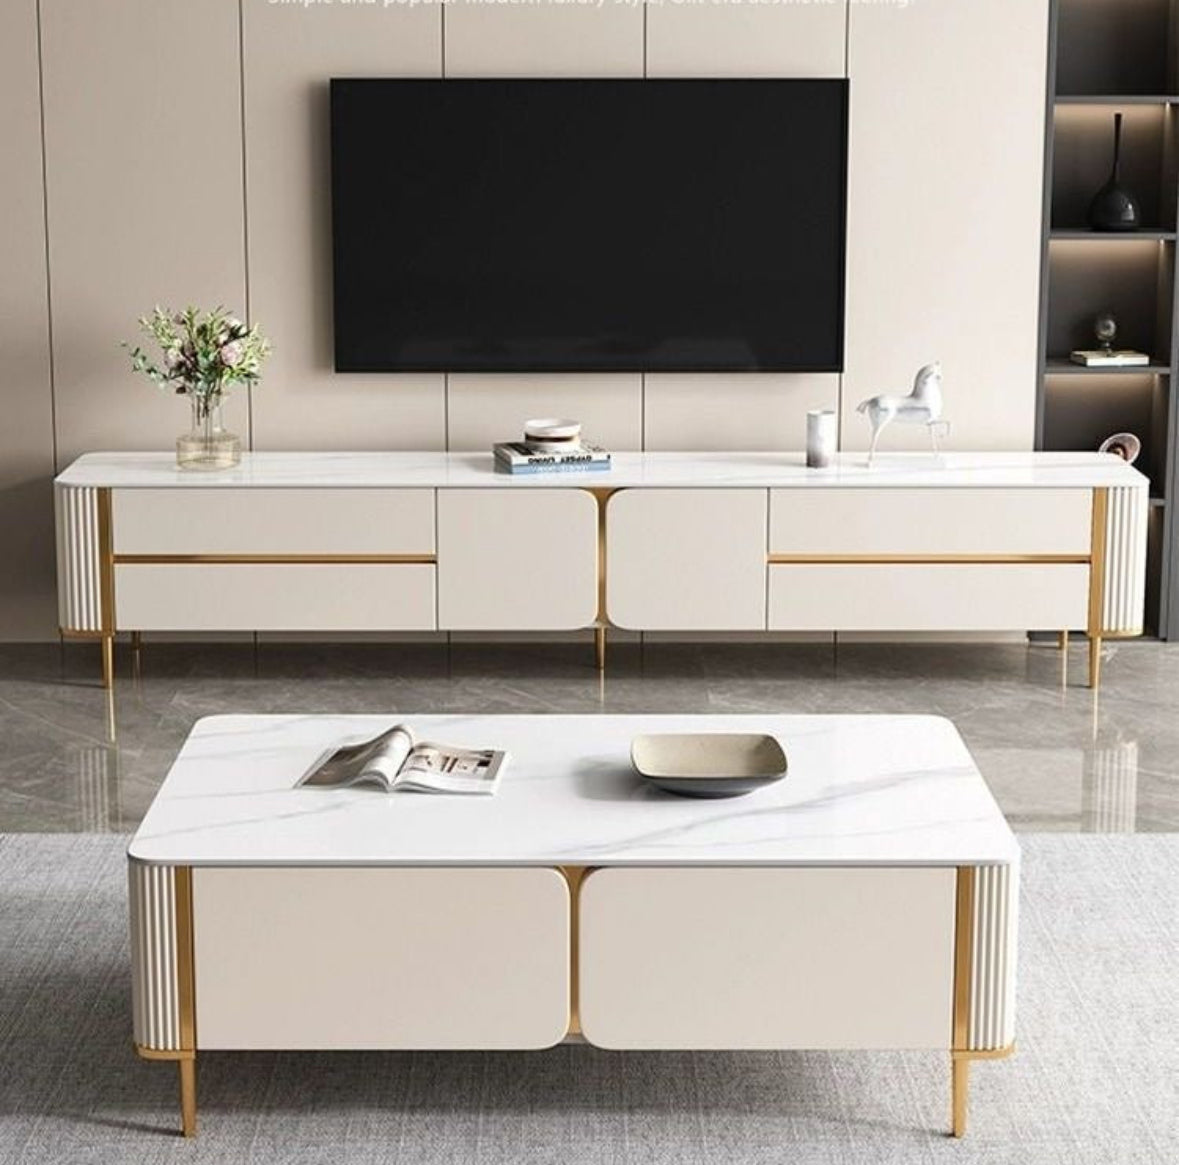 Tv stand set with center table